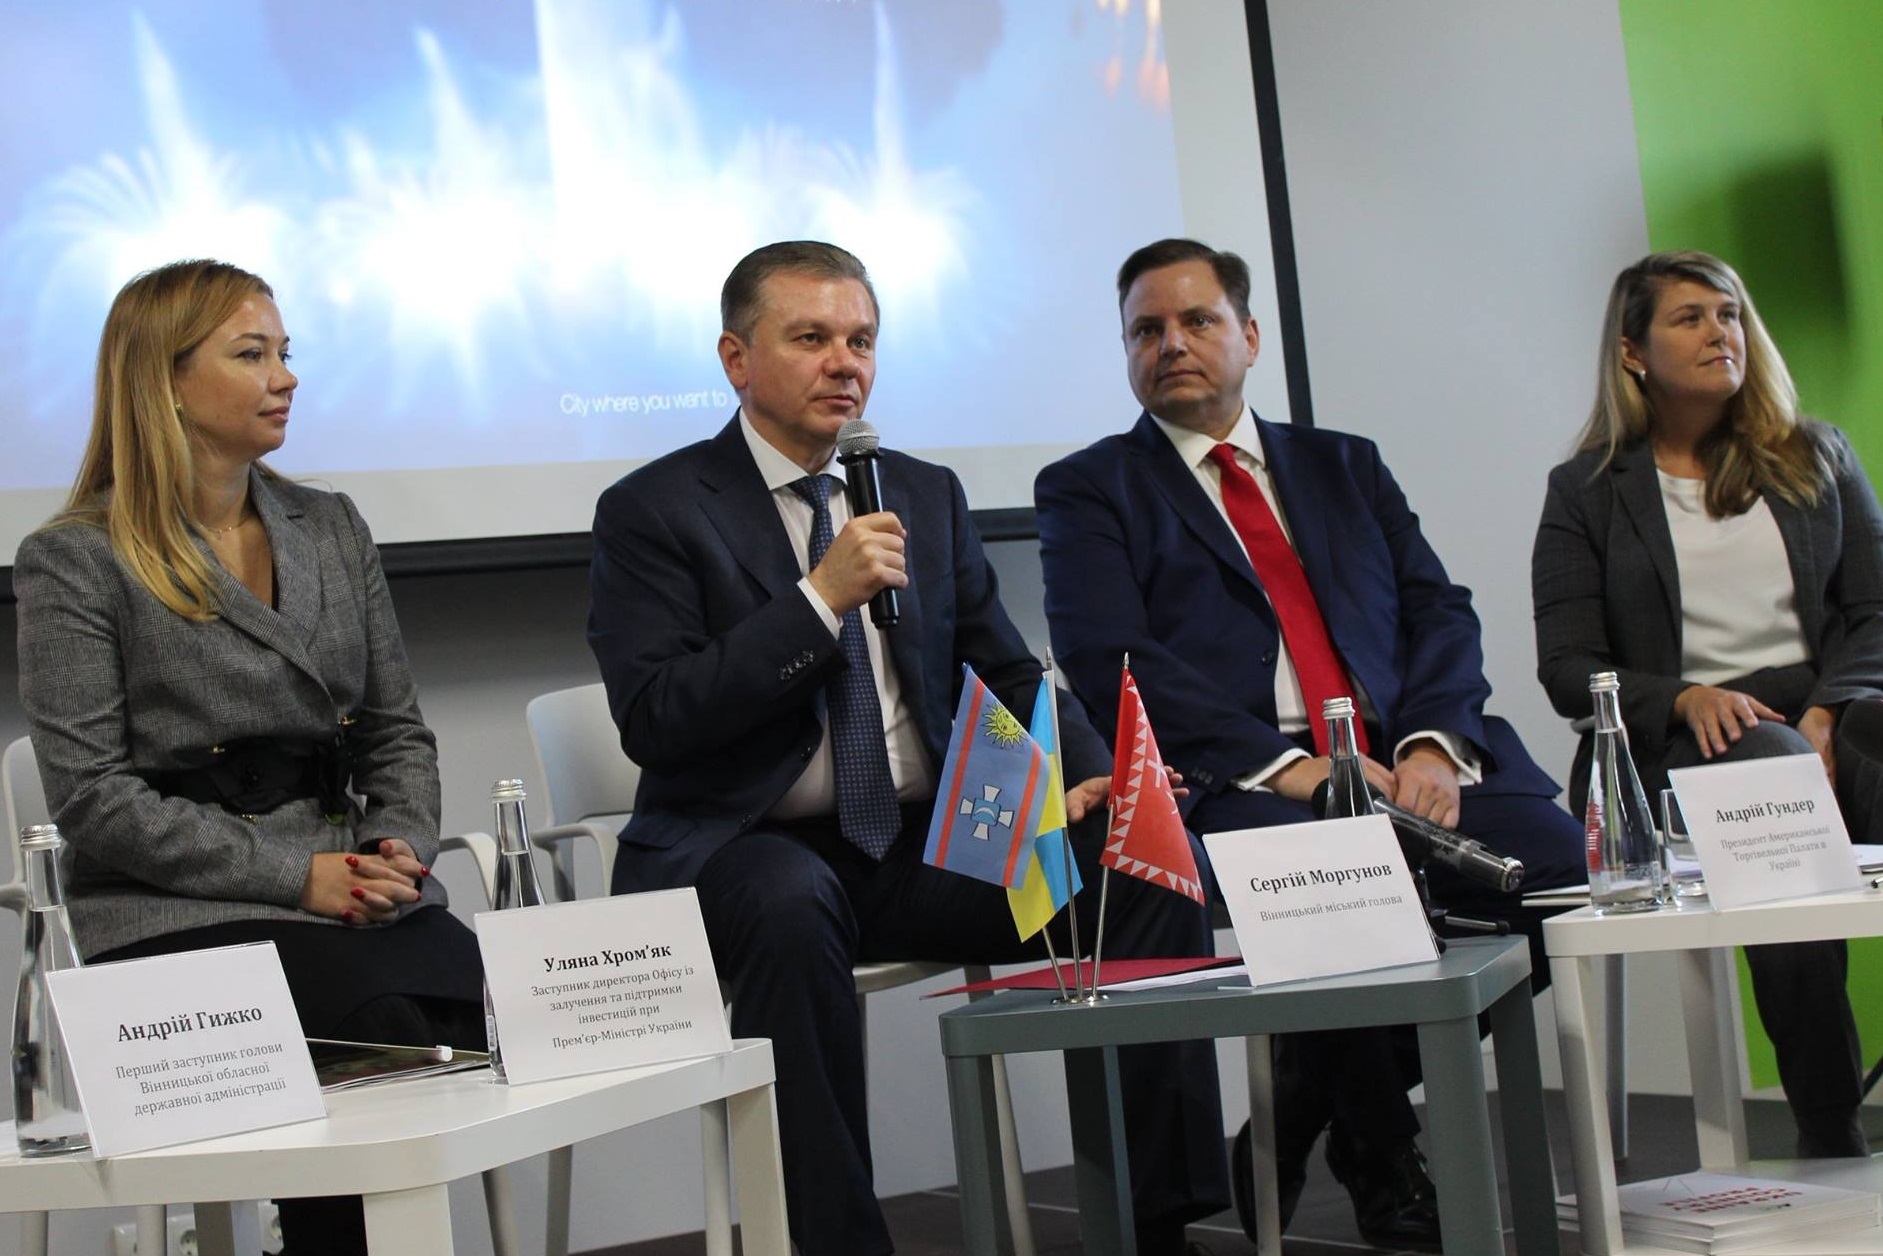 The investment potential of Vinnytsia was presented to one of the most famous business associations in the world